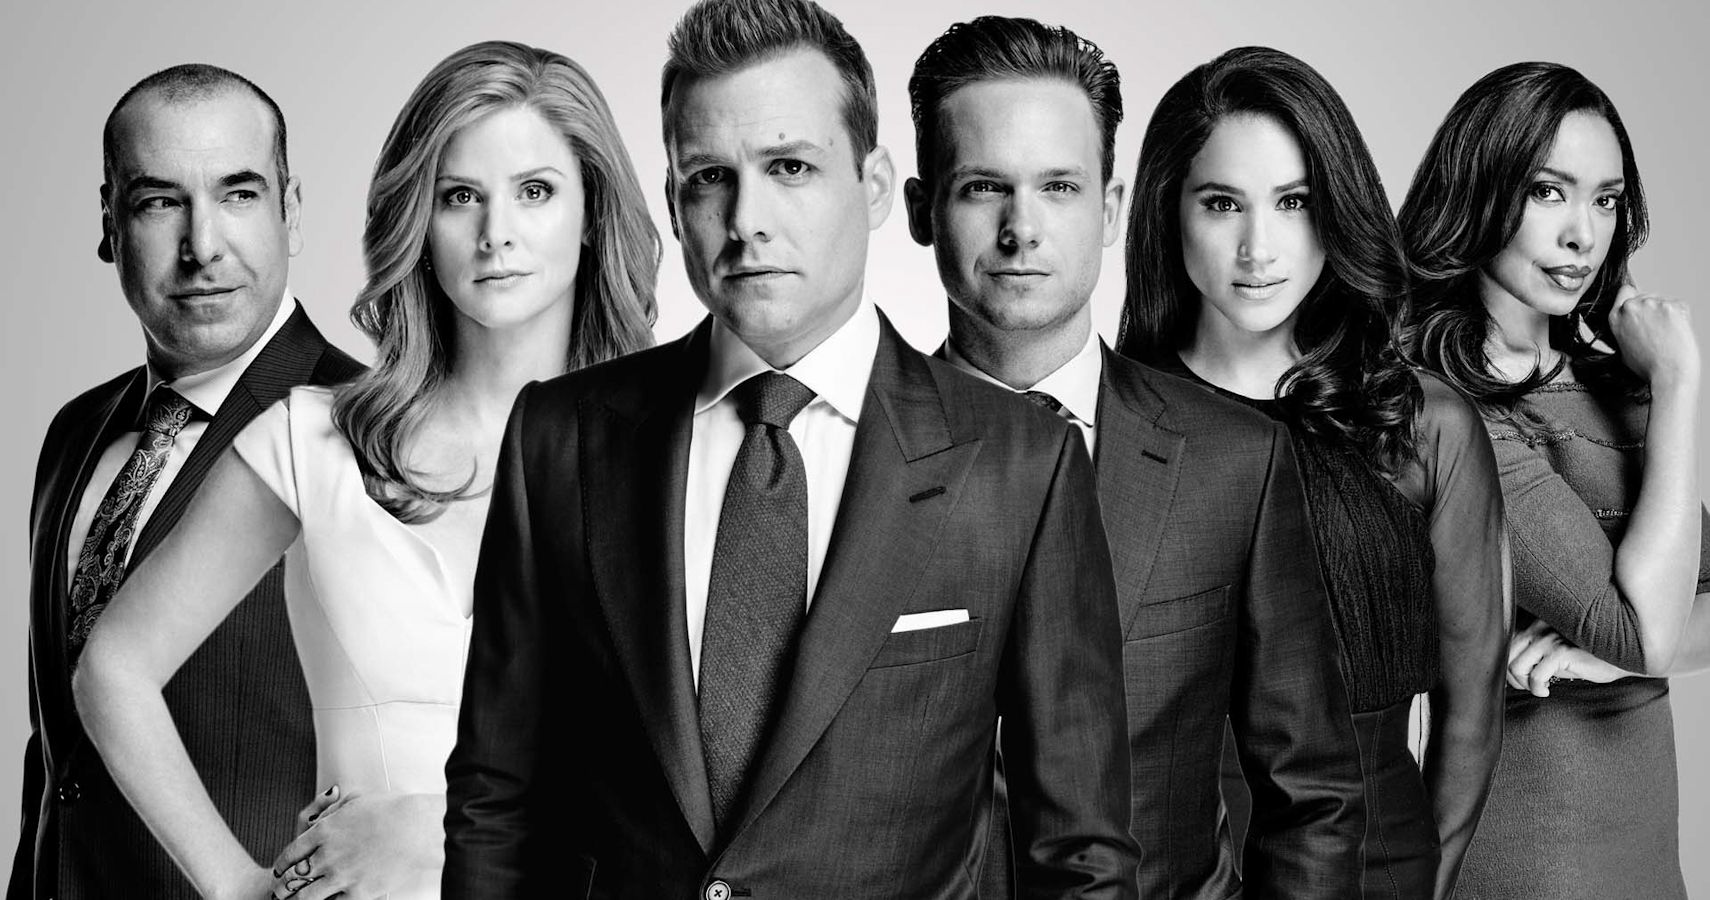 Suits 10 Best Episodes From Season 5, Ranked (According To IMDb)